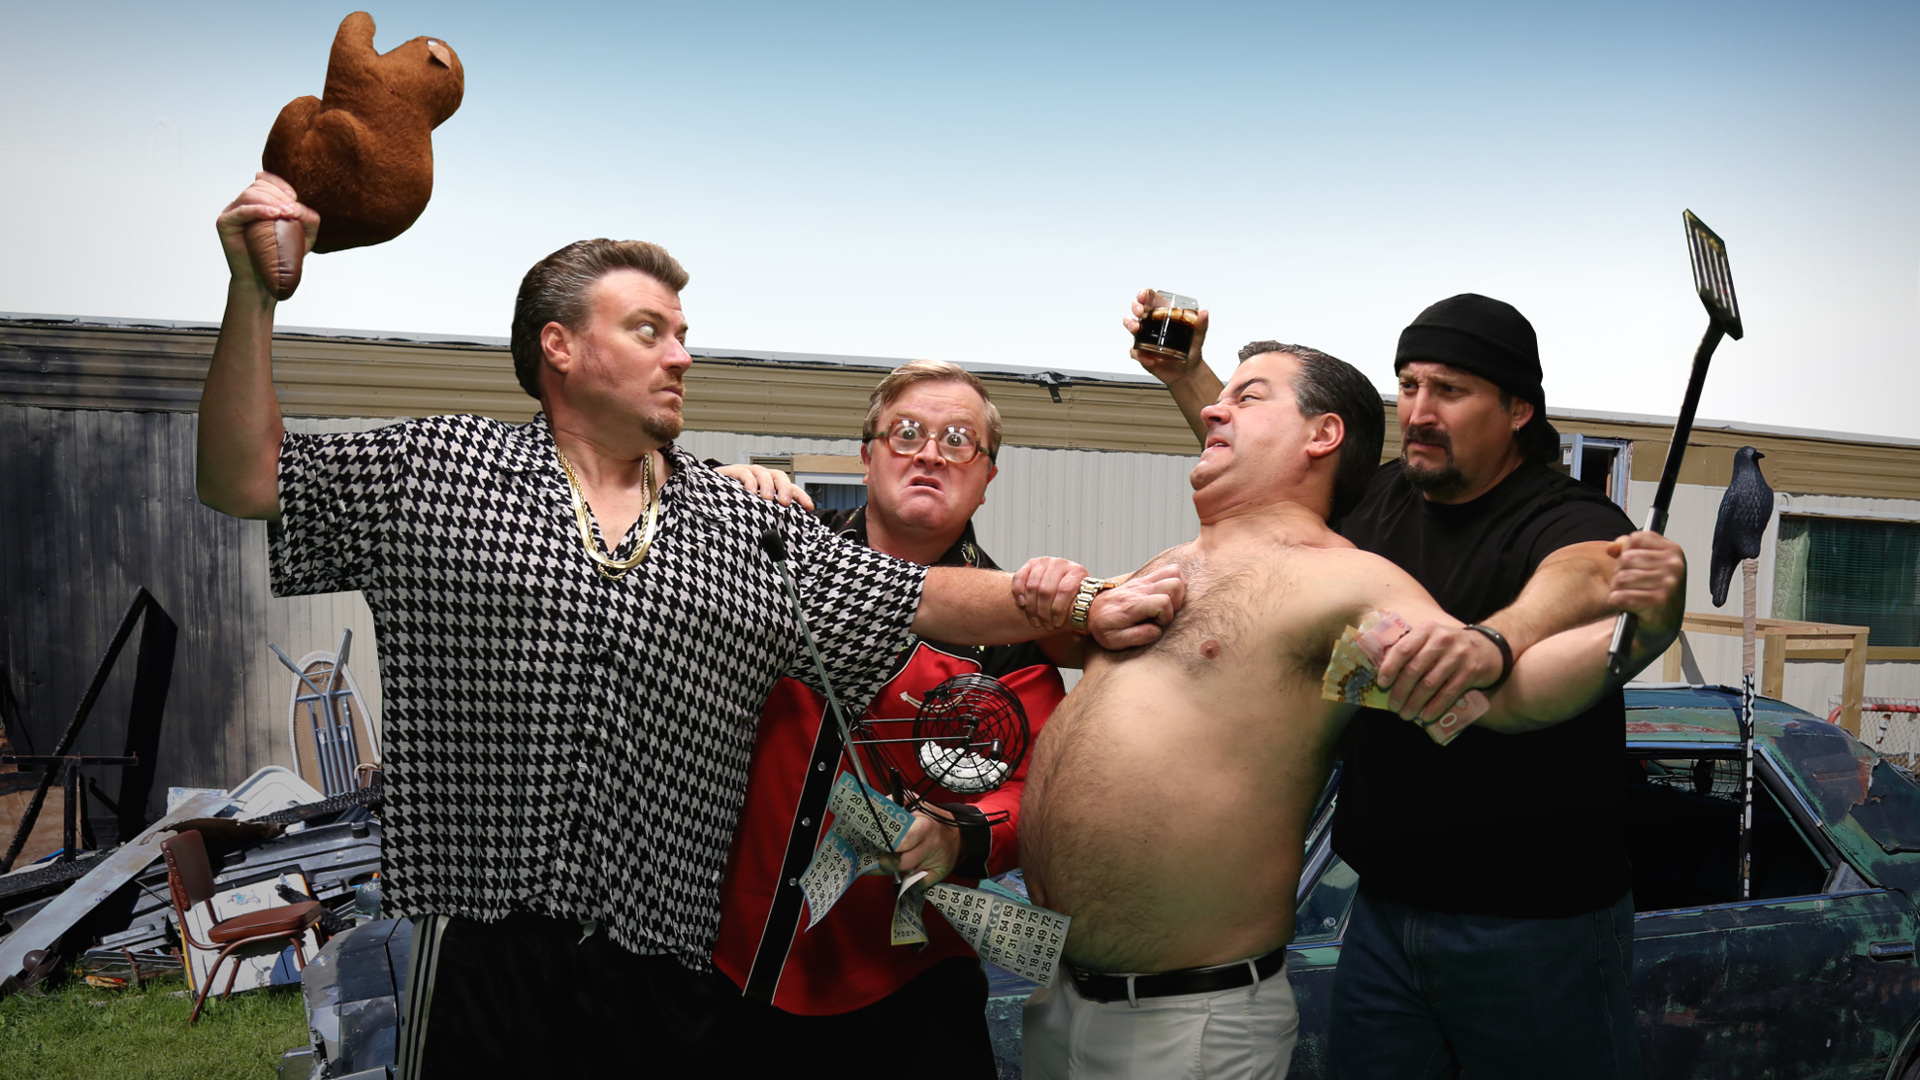 1920x1080 SOLD OUT: A F#CKED UP EVENING WITH THE TRAILER PARK BOYS Albert Hall Manchester